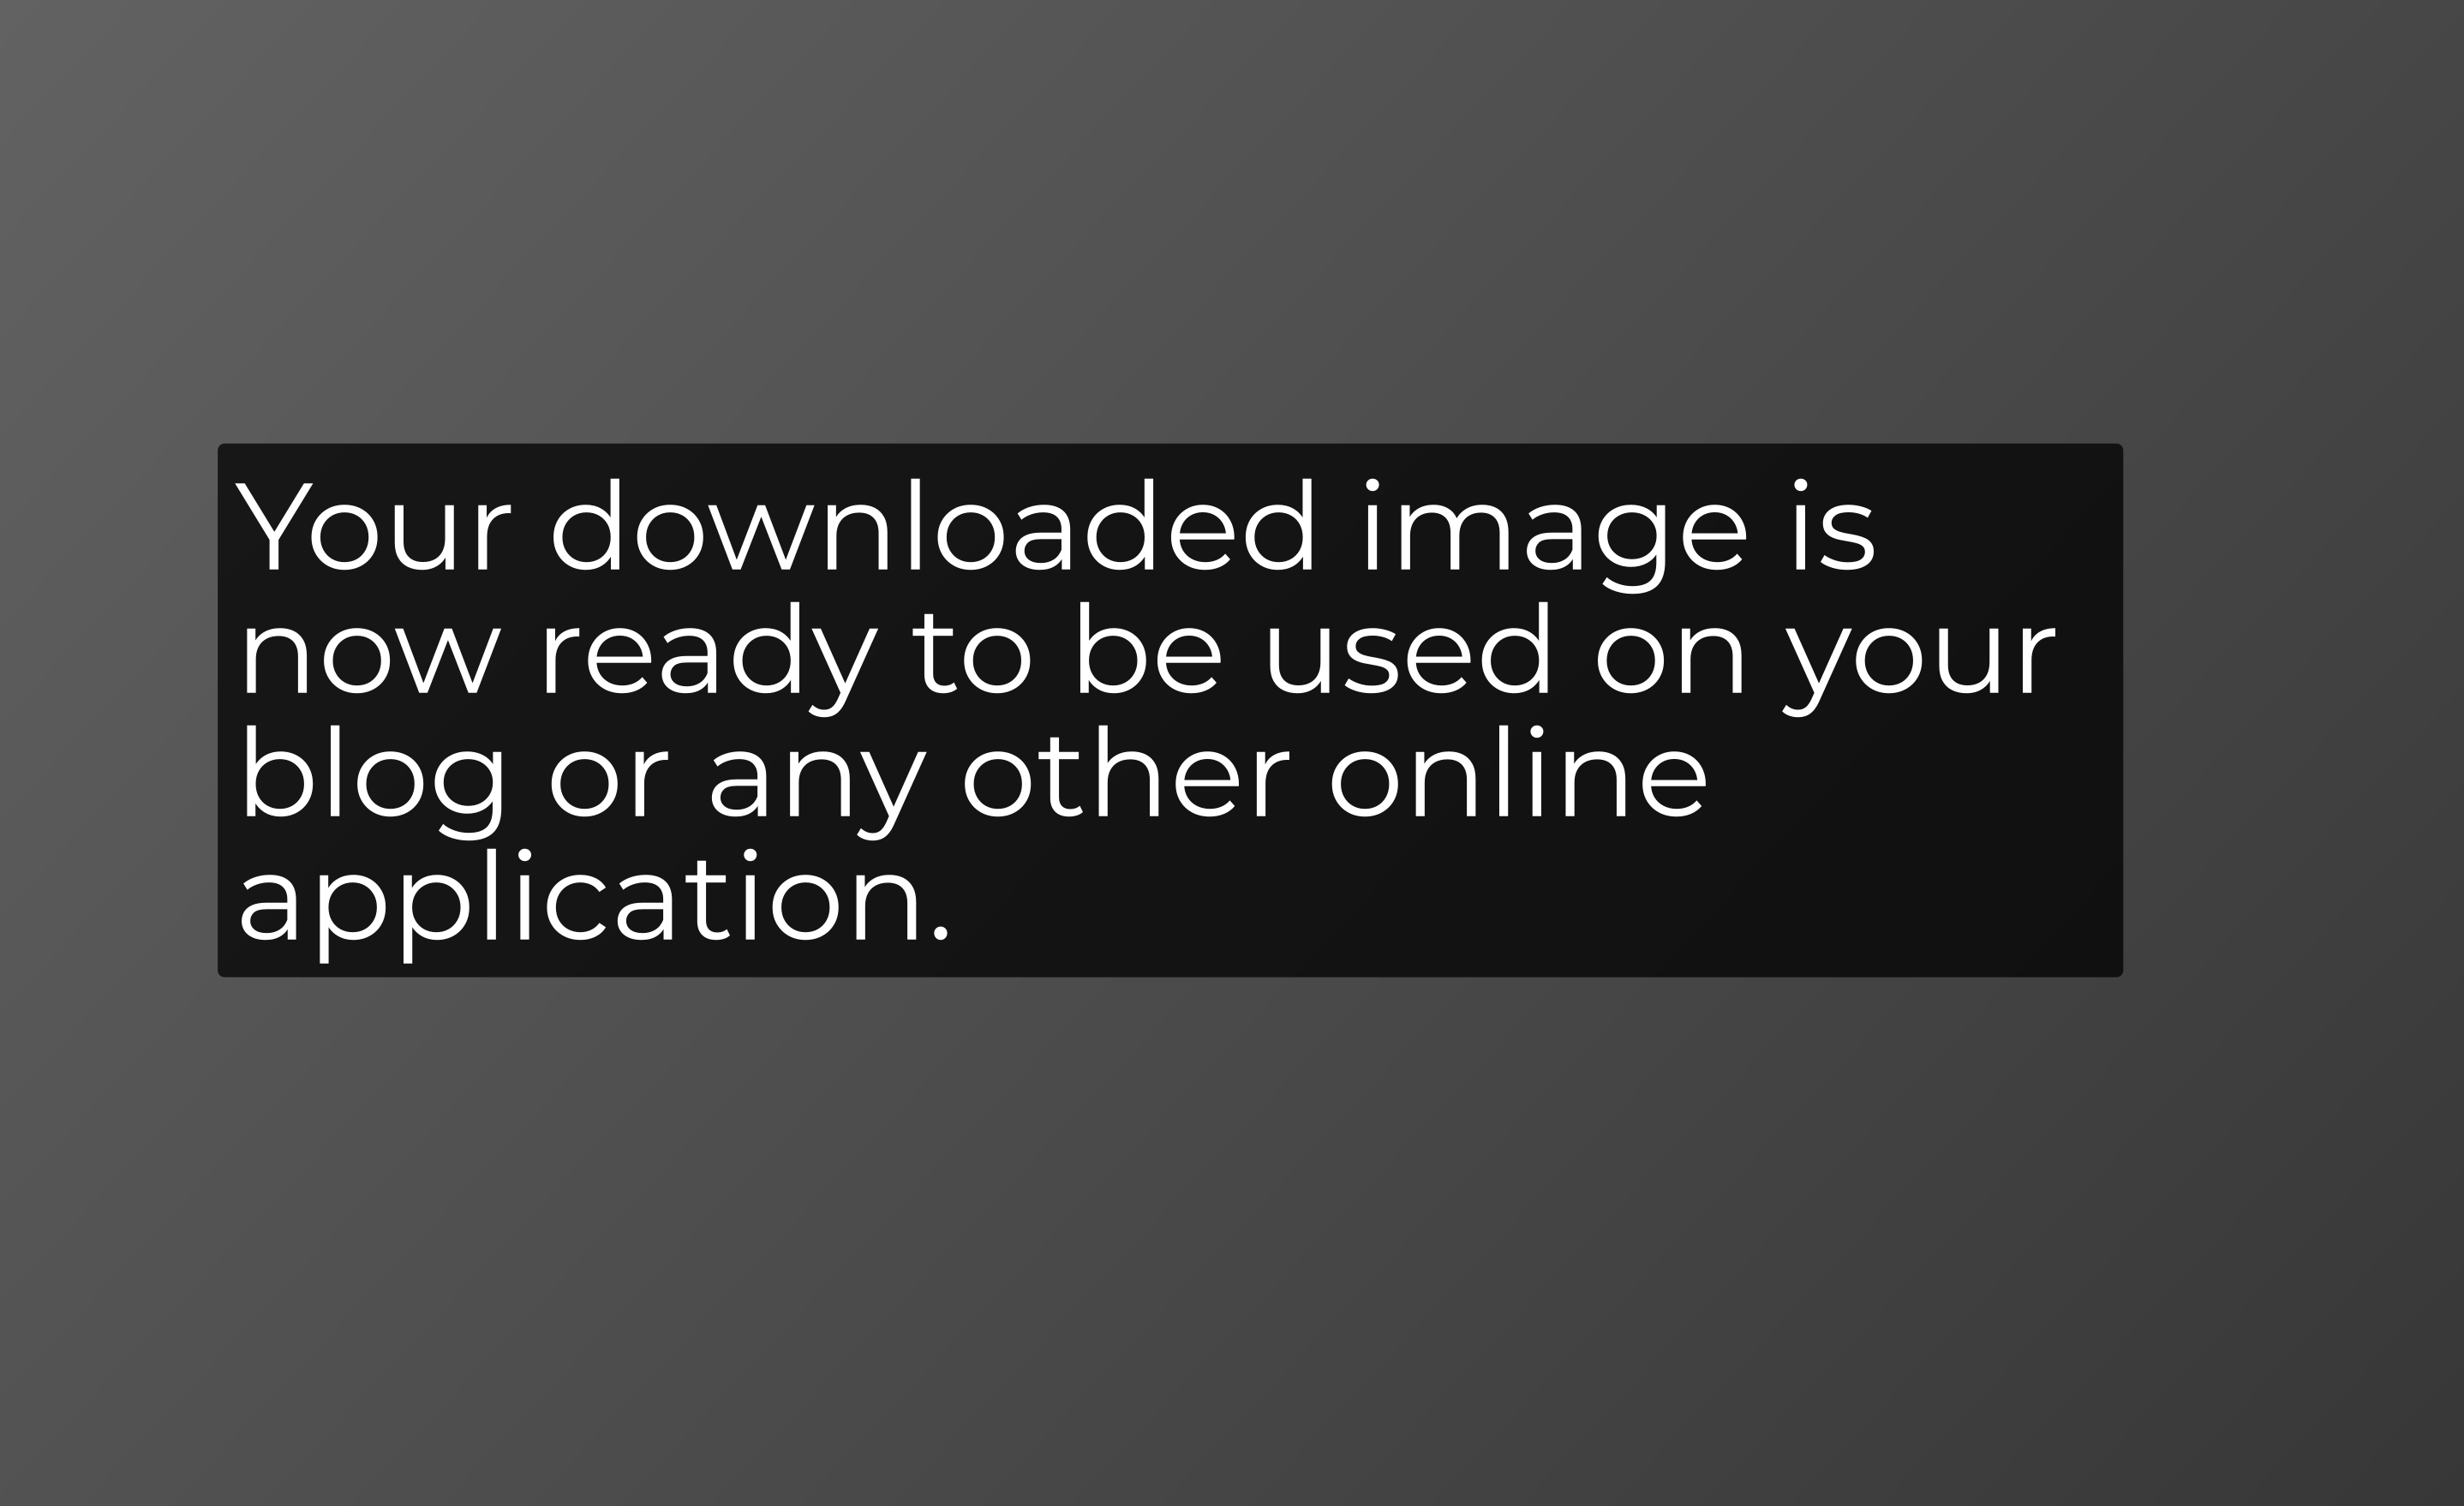 Your Downloaded Image Is Now Ready To Be Used On Your Blog Or Any Other Online Application.